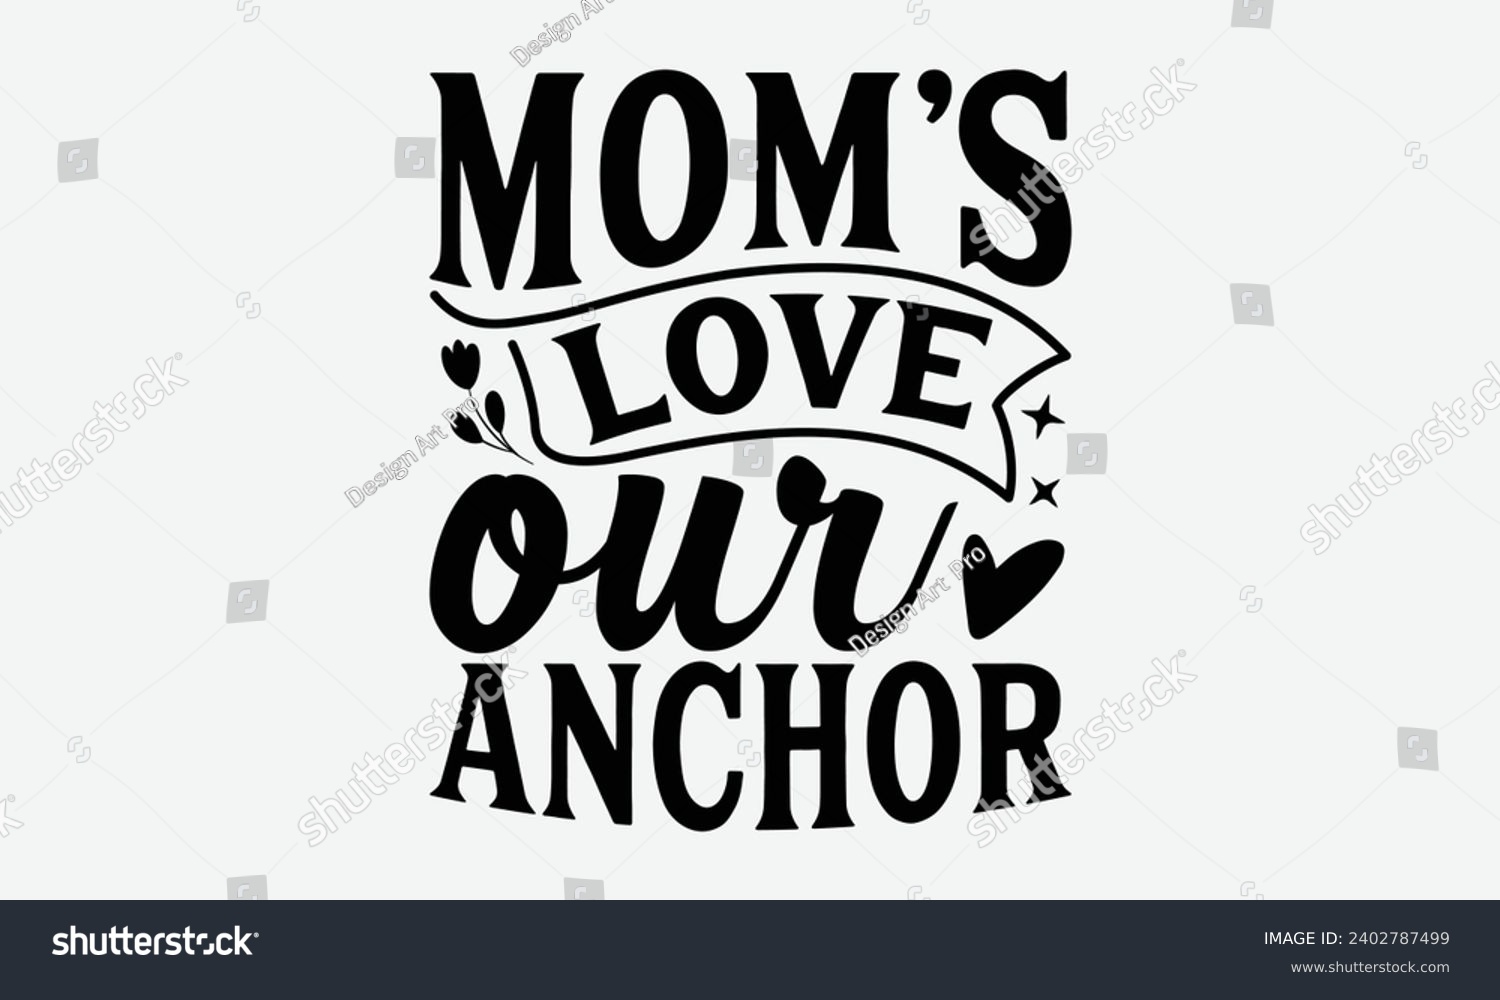 SVG of Mom's Love Our Anchor -Mother's Day t-Shirt Designs, Calligraphy Motivational Good Quotes, Everything Starts With A Dream, Know Your Worth, For Poster, Hoodie, Wall, Banner, Flyer And Mug. svg